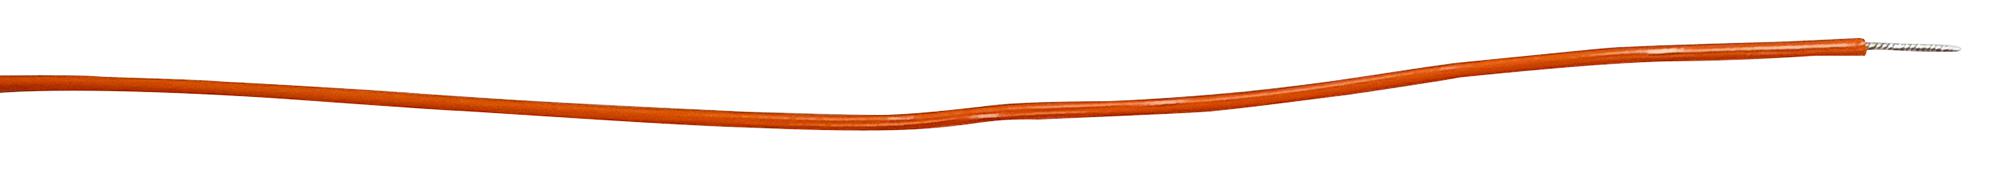 PP002561 CABLE WIRE, 24AWG, ORANGE, 305M PRO POWER